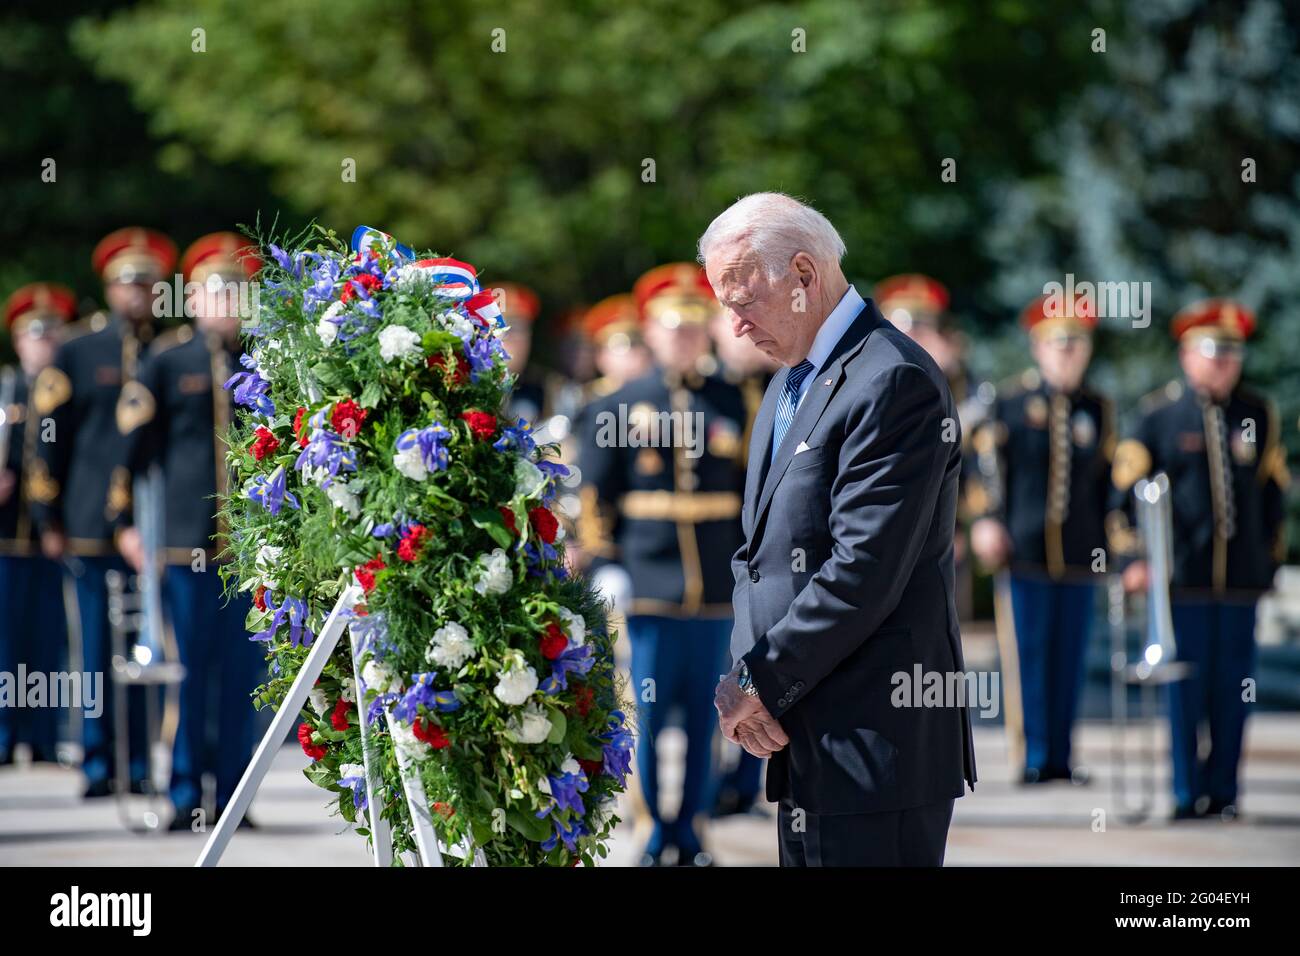 Arlington, United States Of America. 31st May, 2021. U.S President Joe Biden during the Presidental Armed Forces Full Honors Wreath-Laying Ceremony at the Tomb of the Unknown Soldier Arlington National Cemetery May 31, 2021 Arlington, Virginia. Credit: Planetpix/Alamy Live News Stock Photo